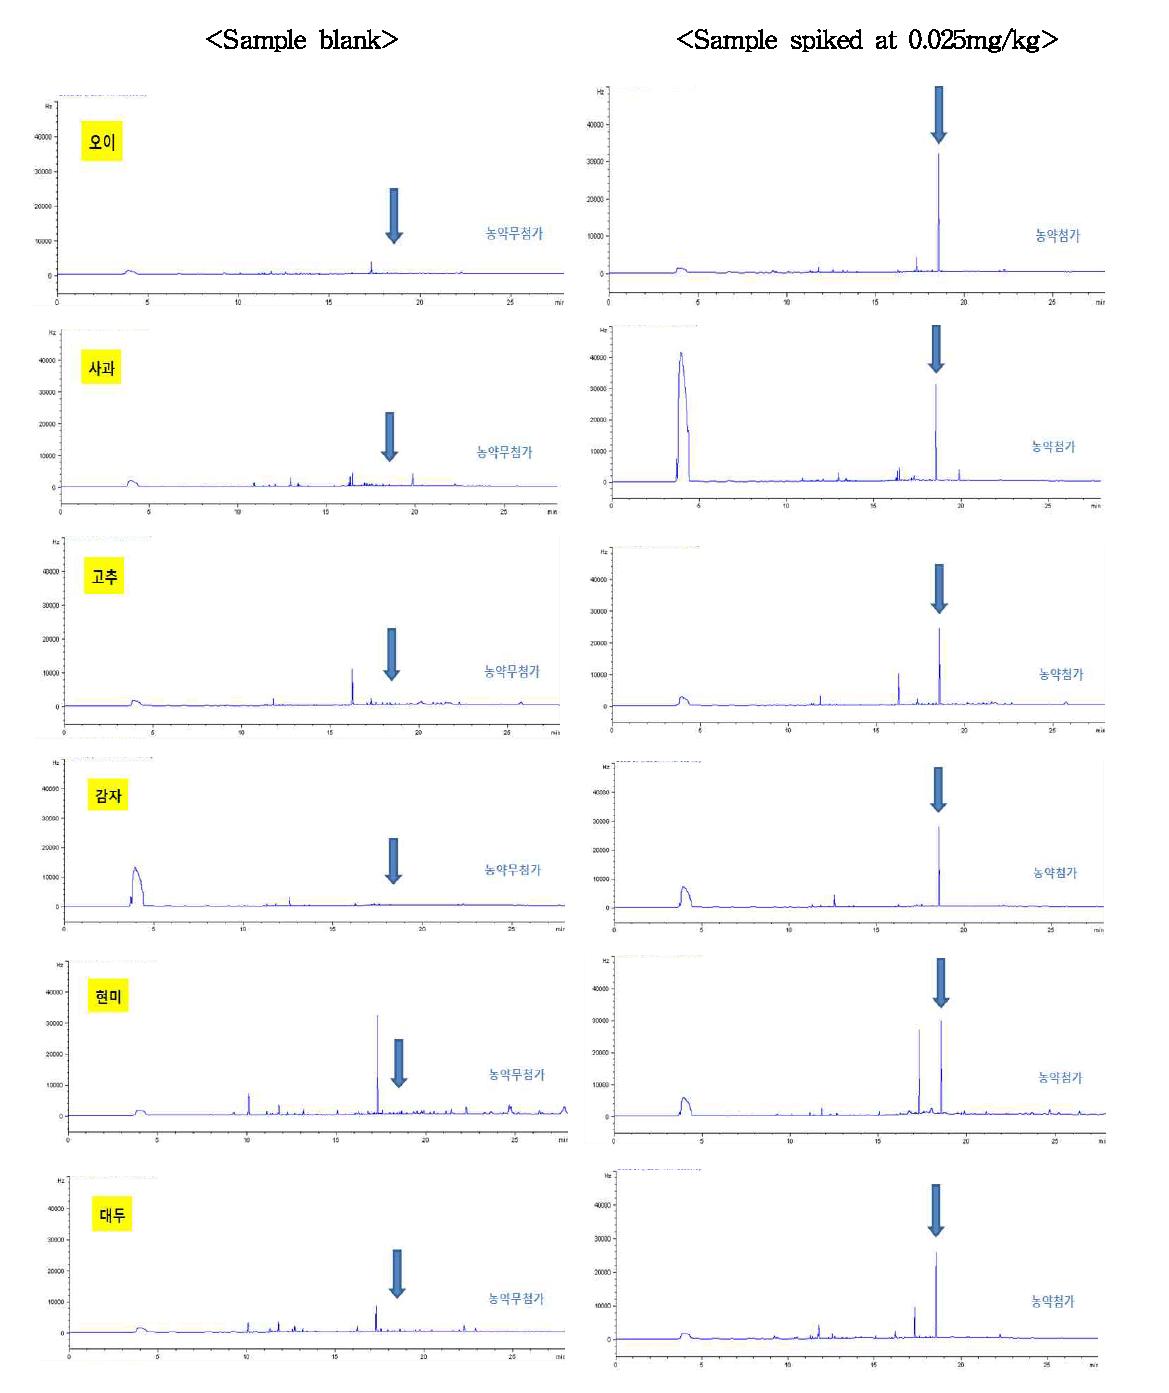 Chromatogram of sample extracts obtained by sample preparation and GC/ECD analysis at 0.025mg/kg spiking level